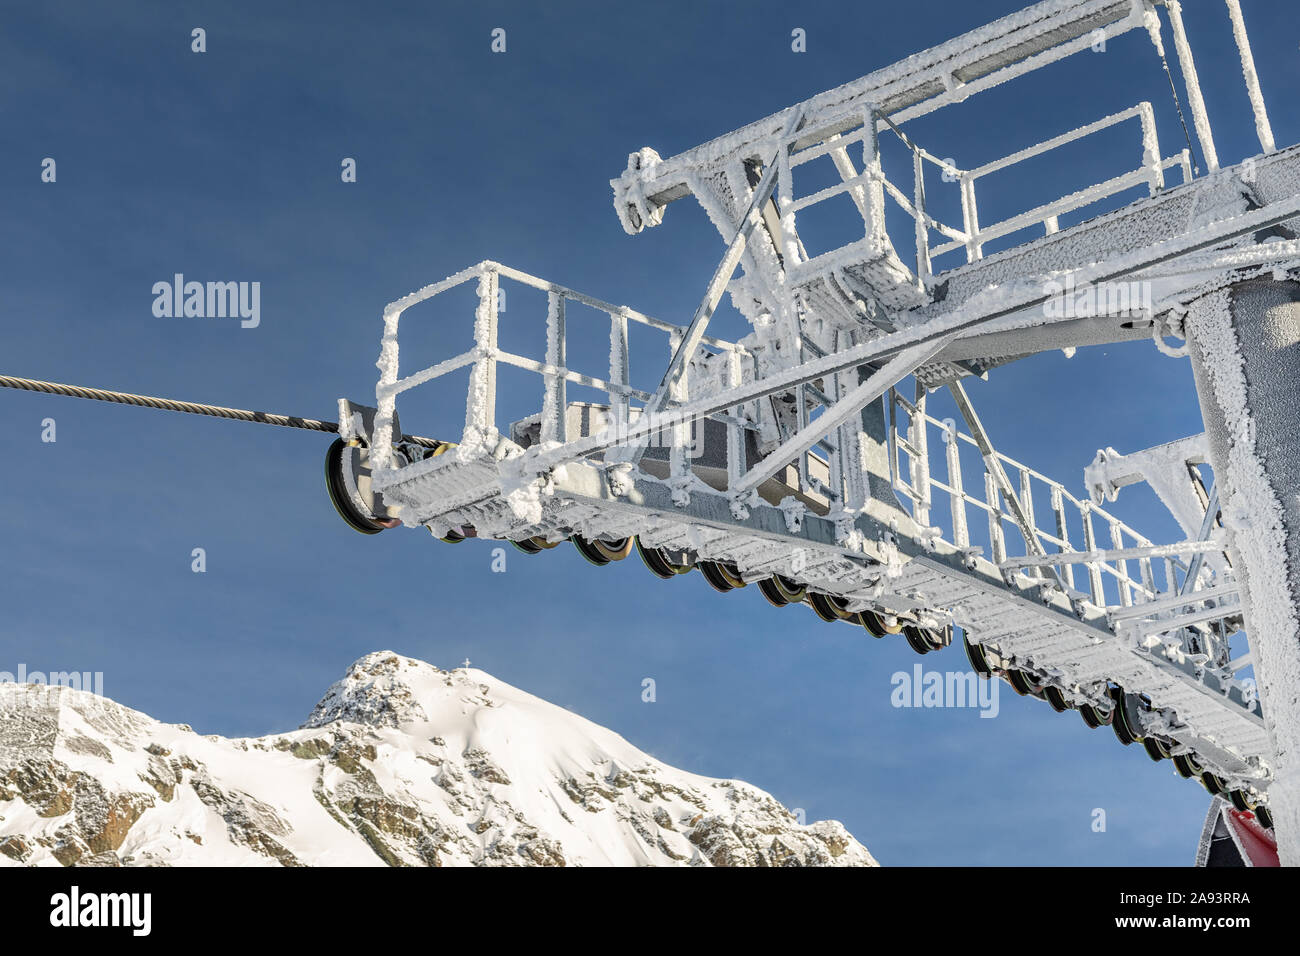 Close-up detailc of ski lift cable car gear wheels covered with